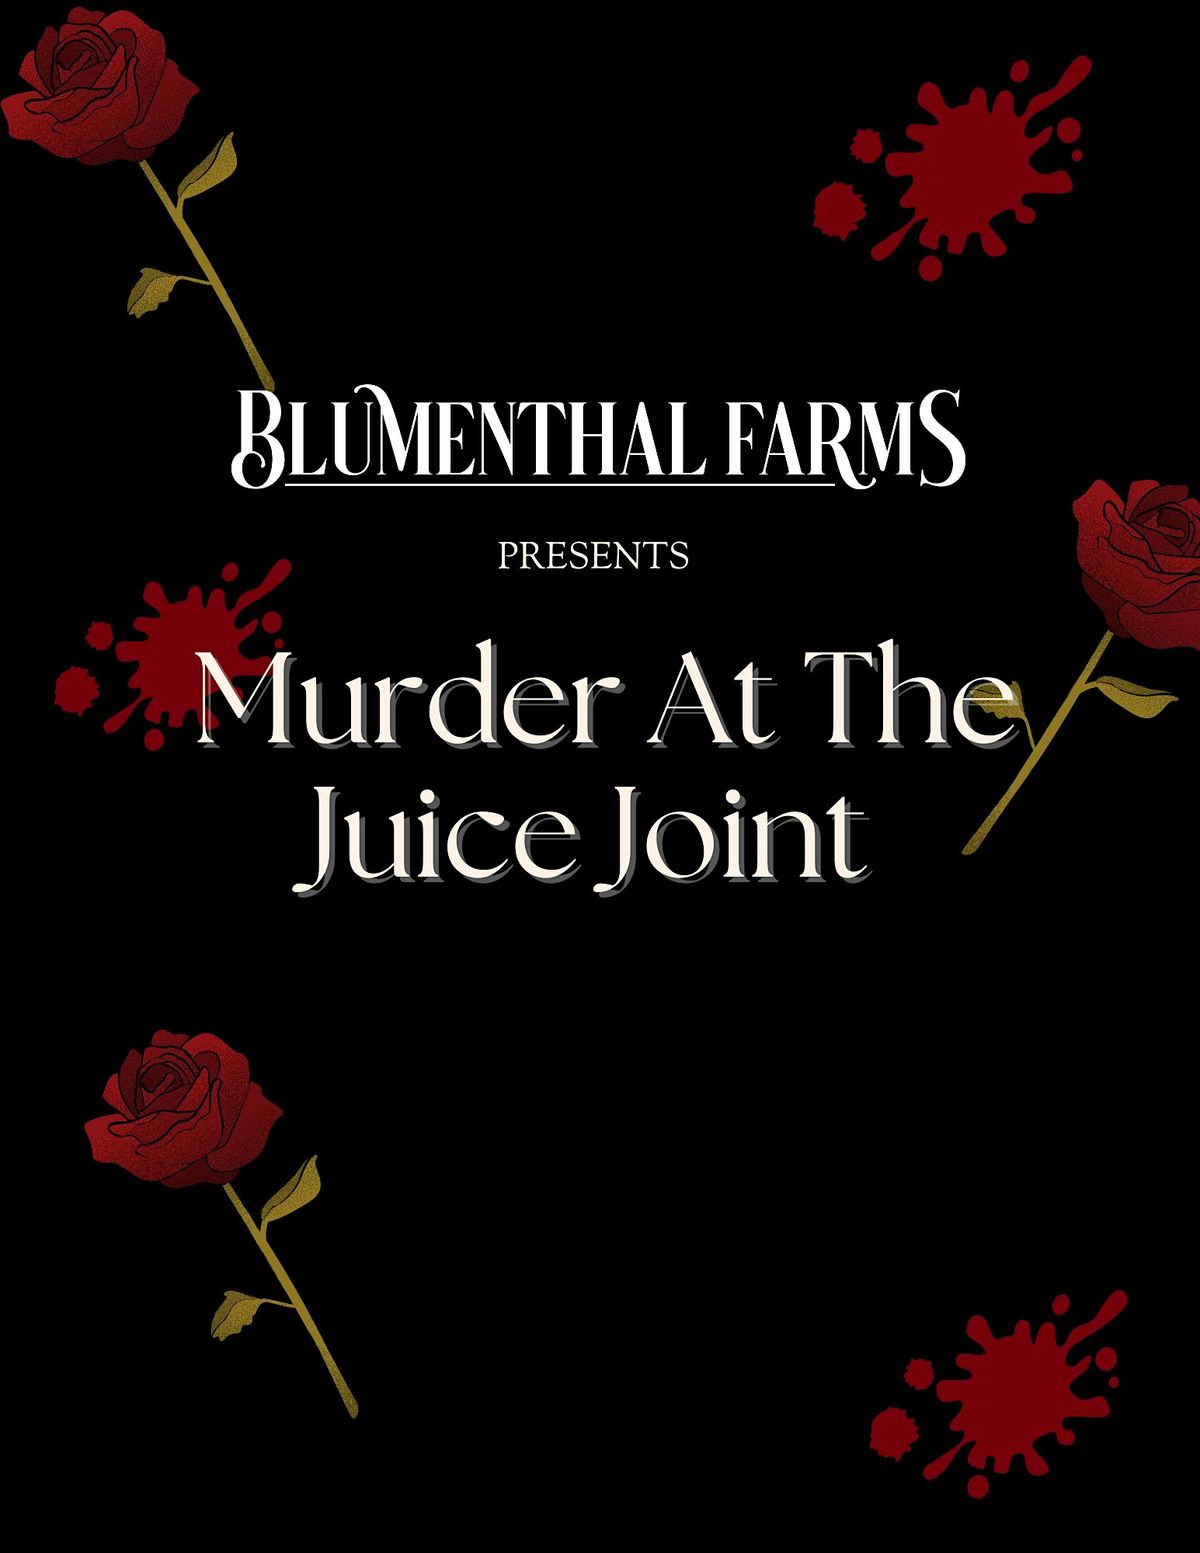 Blumenthal Farms: M**der At The Juice Joint